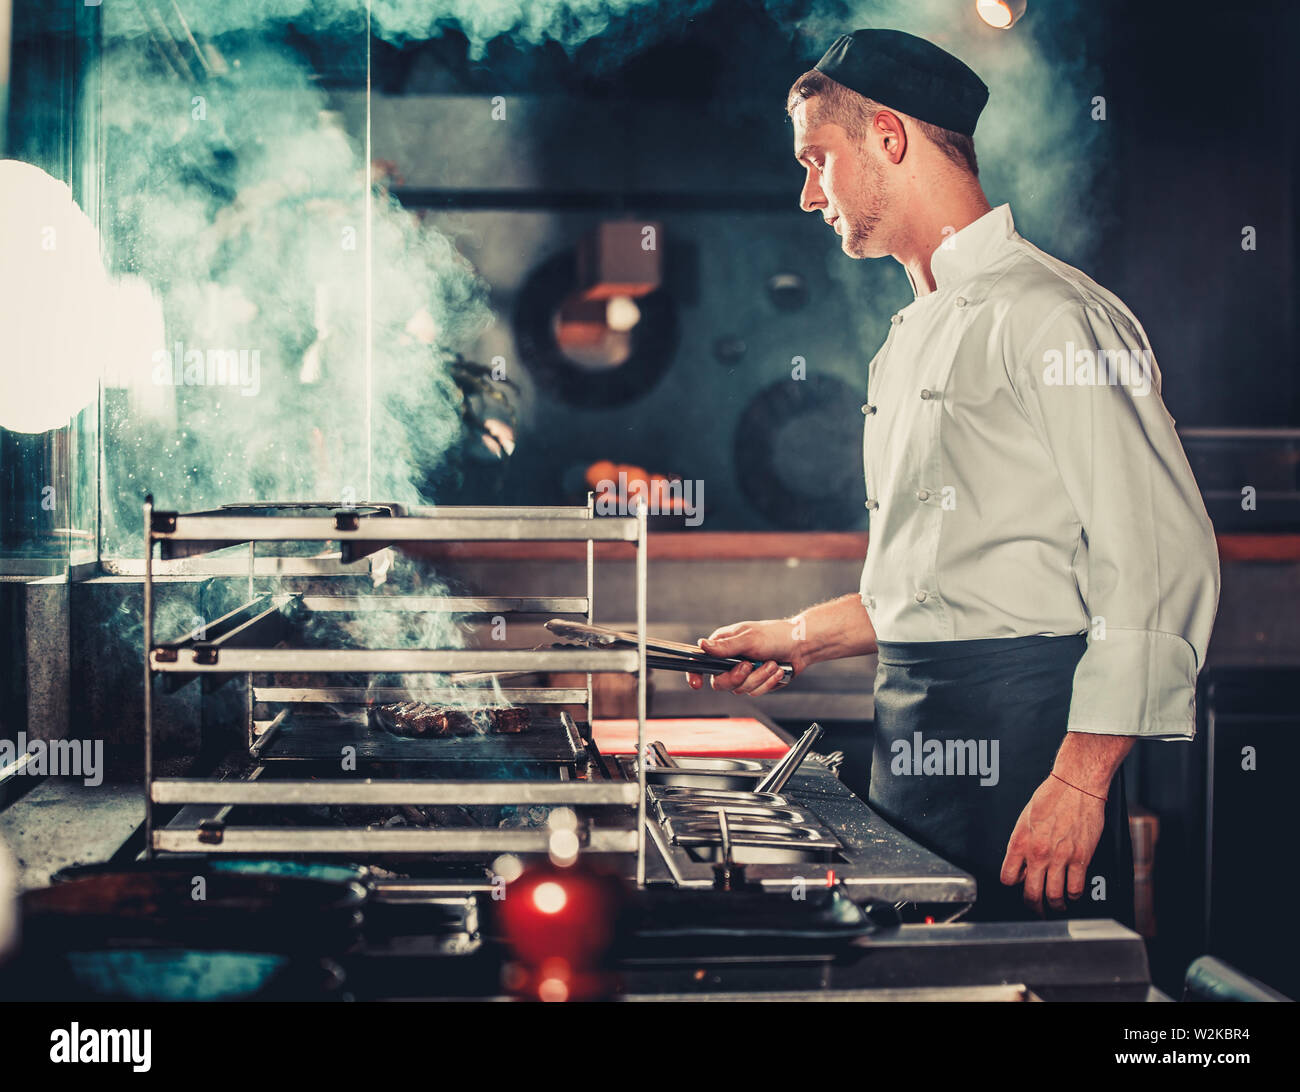 Young male cook preparing meal on the grill in kitchen Stock Photo